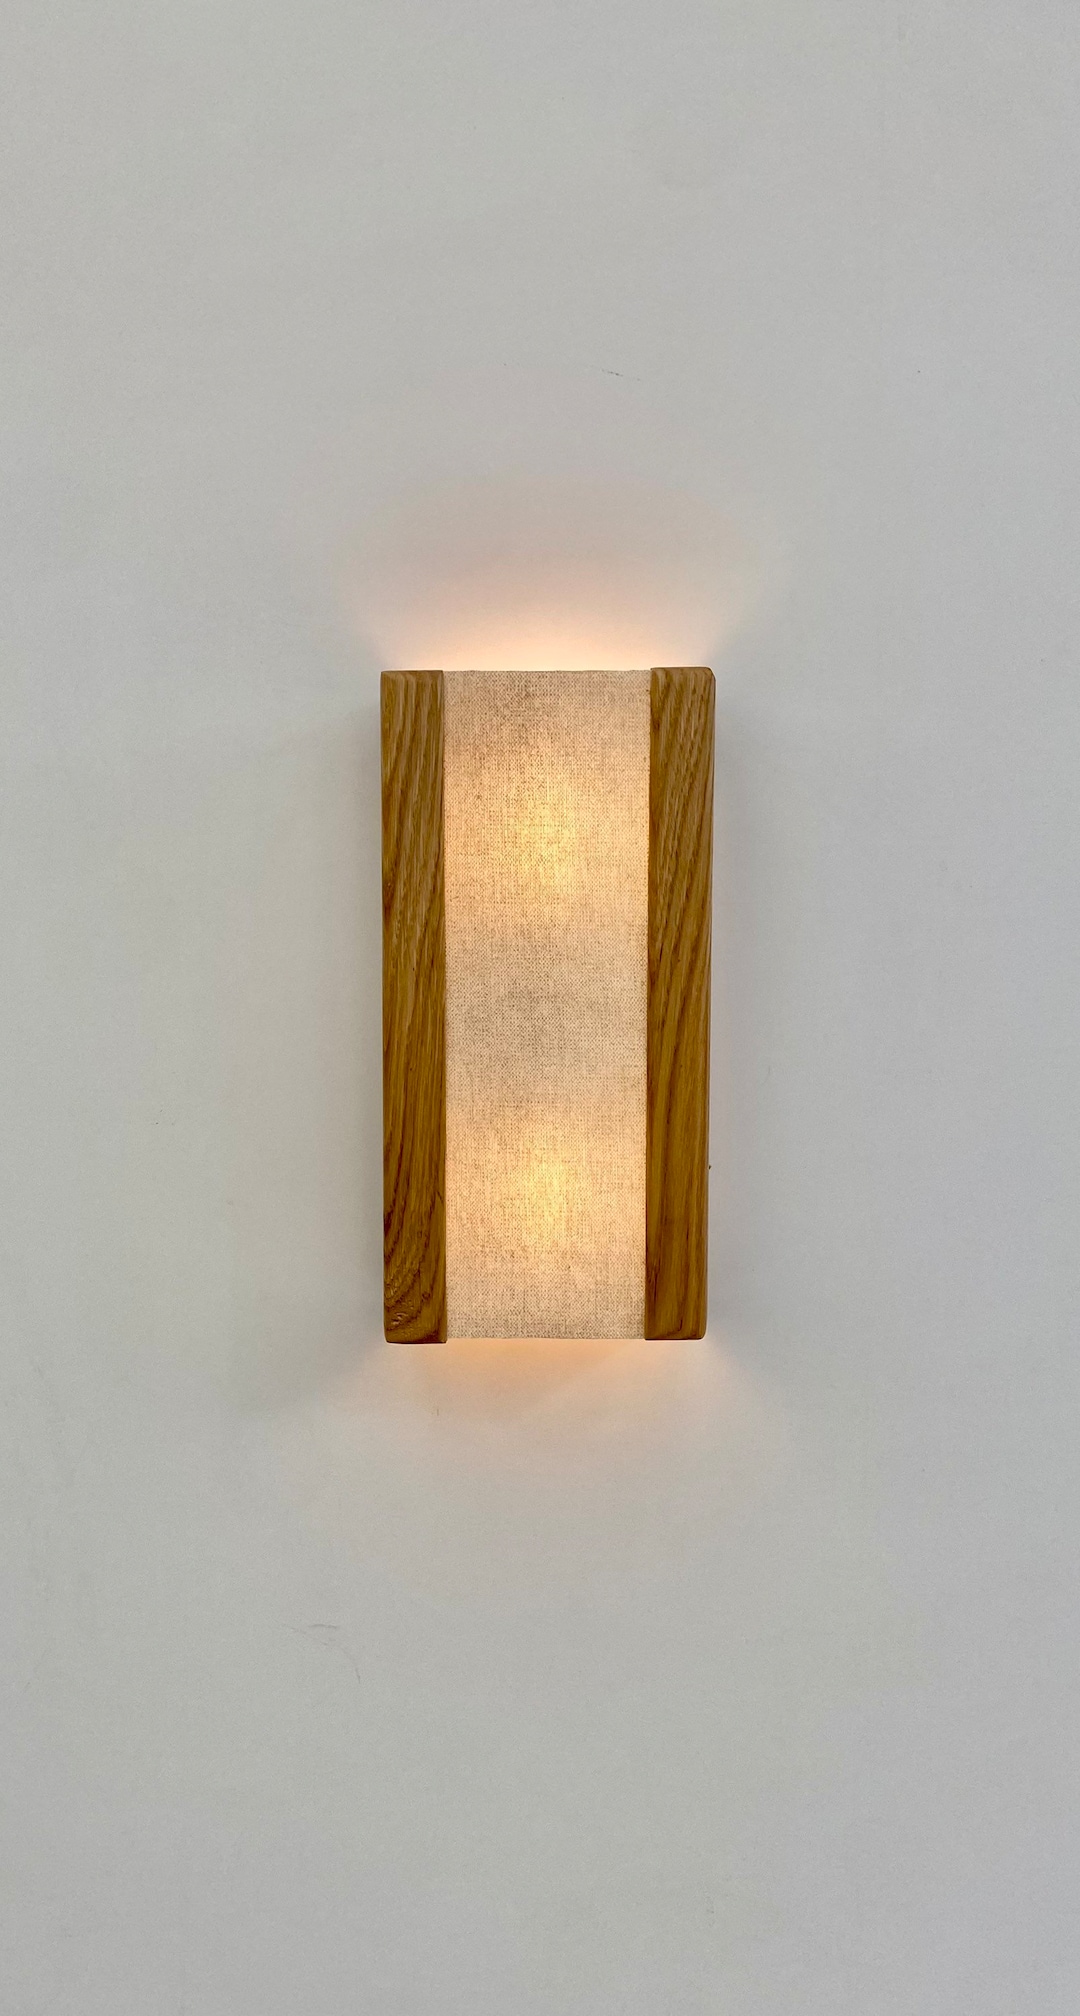 Buy Wall Lamp Made With Natural Oak Wood and Fabric. Sustainable Online in  India Etsy